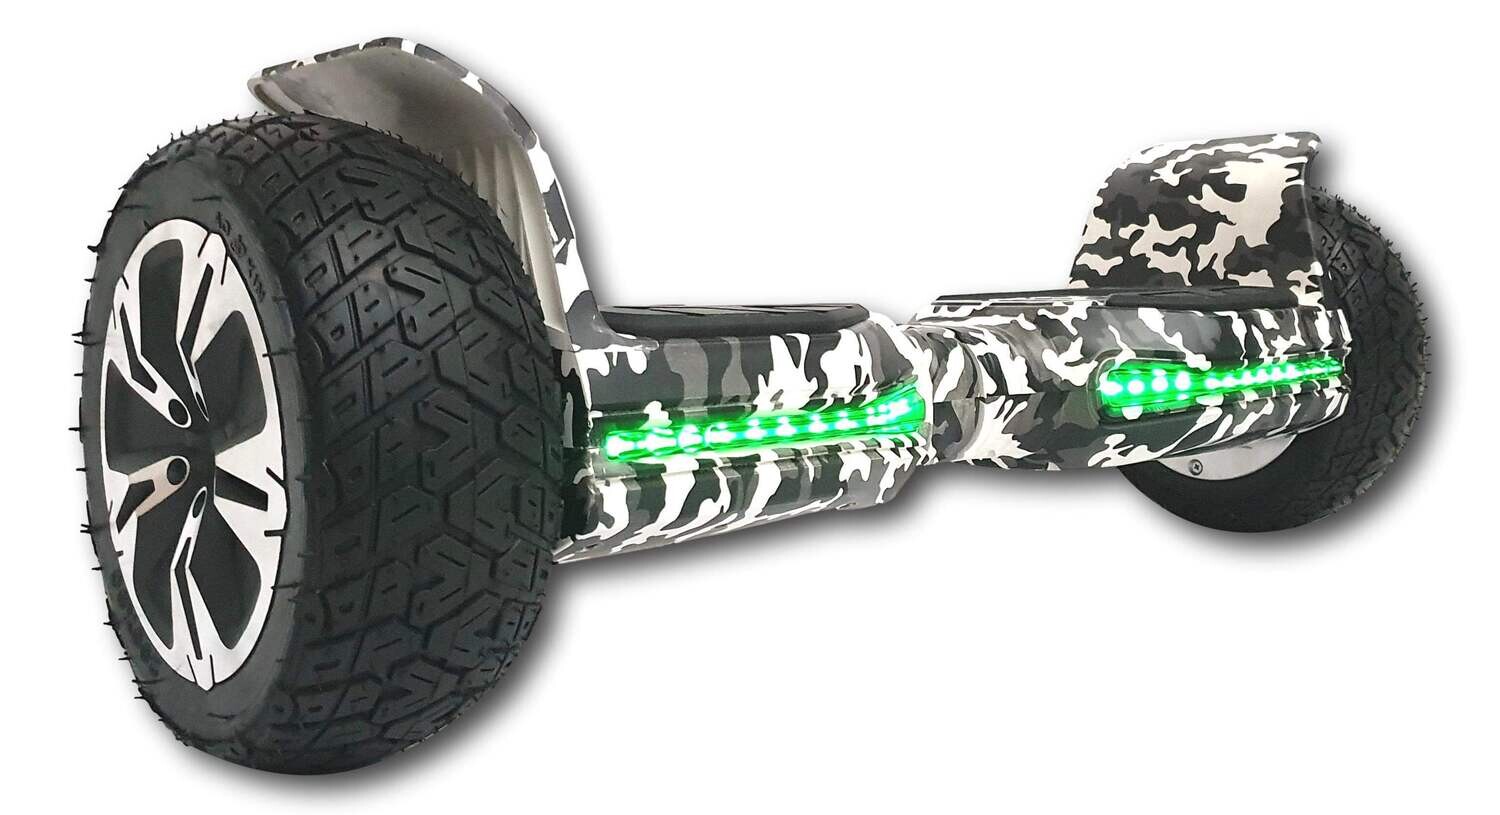 G5 XR Pro Off Road Water resistant IPX4 Hoverboard 8.5" Camouflage